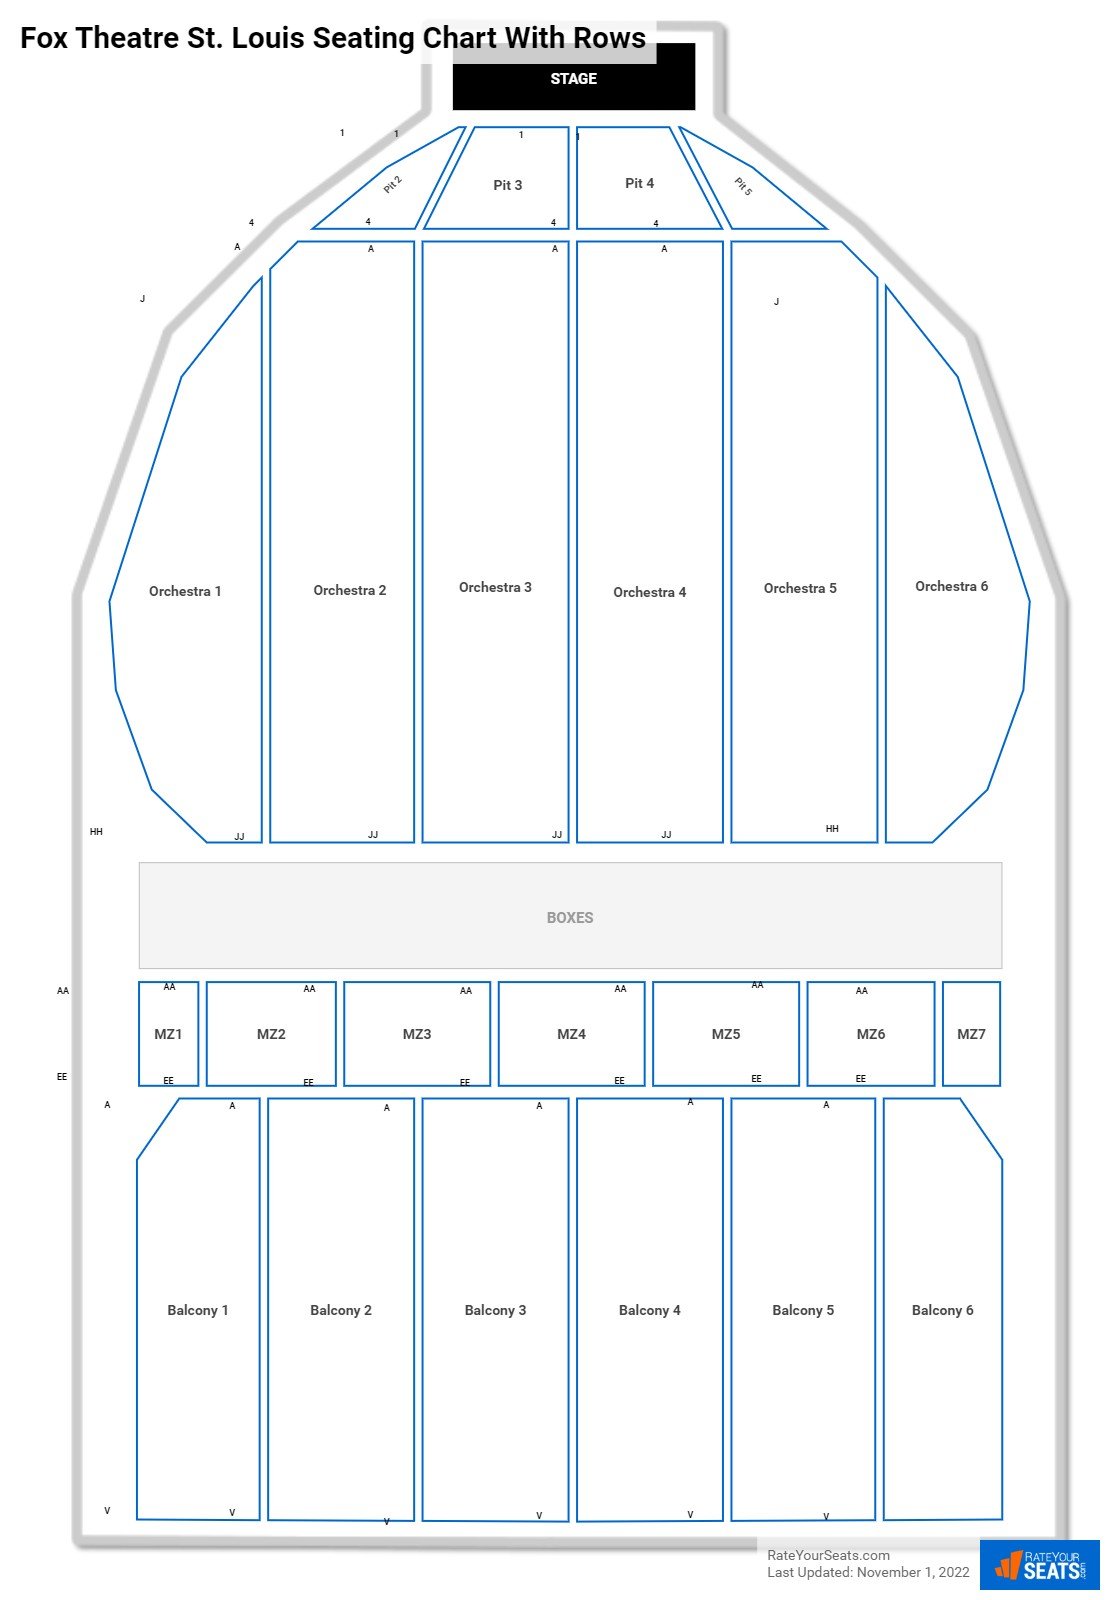 Fox Theatre St. Louis seating chart with row numbers